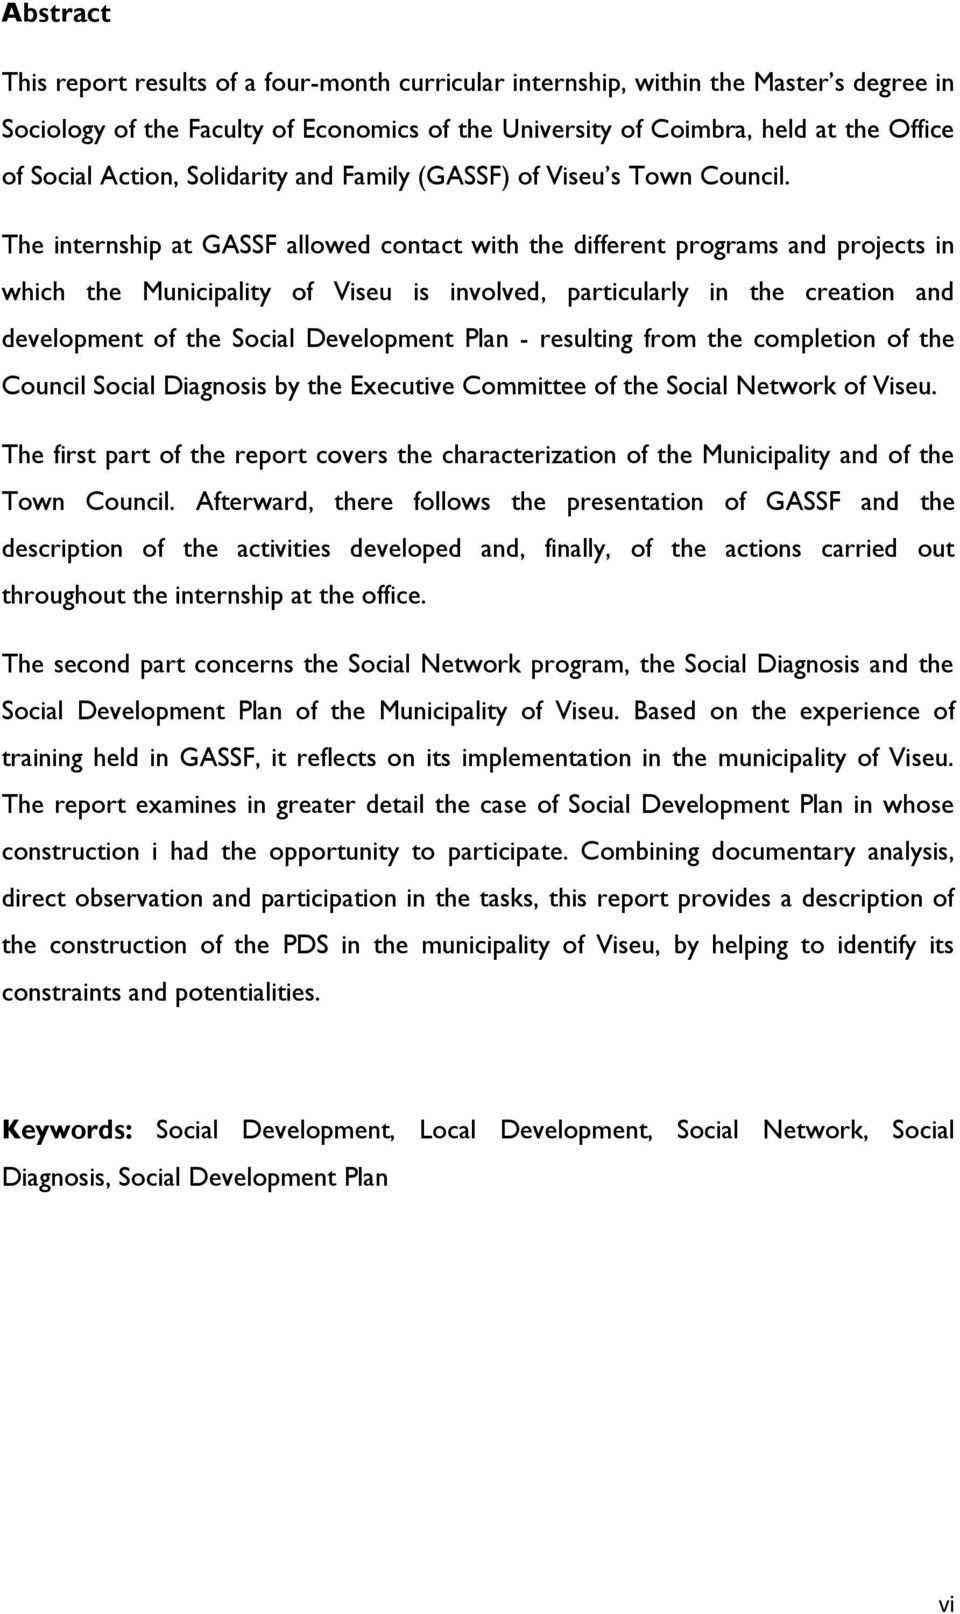 The internship at GASSF allowed contact with the different programs and projects in which the Municipality of Viseu is involved, particularly in the creation and development of the Social Development